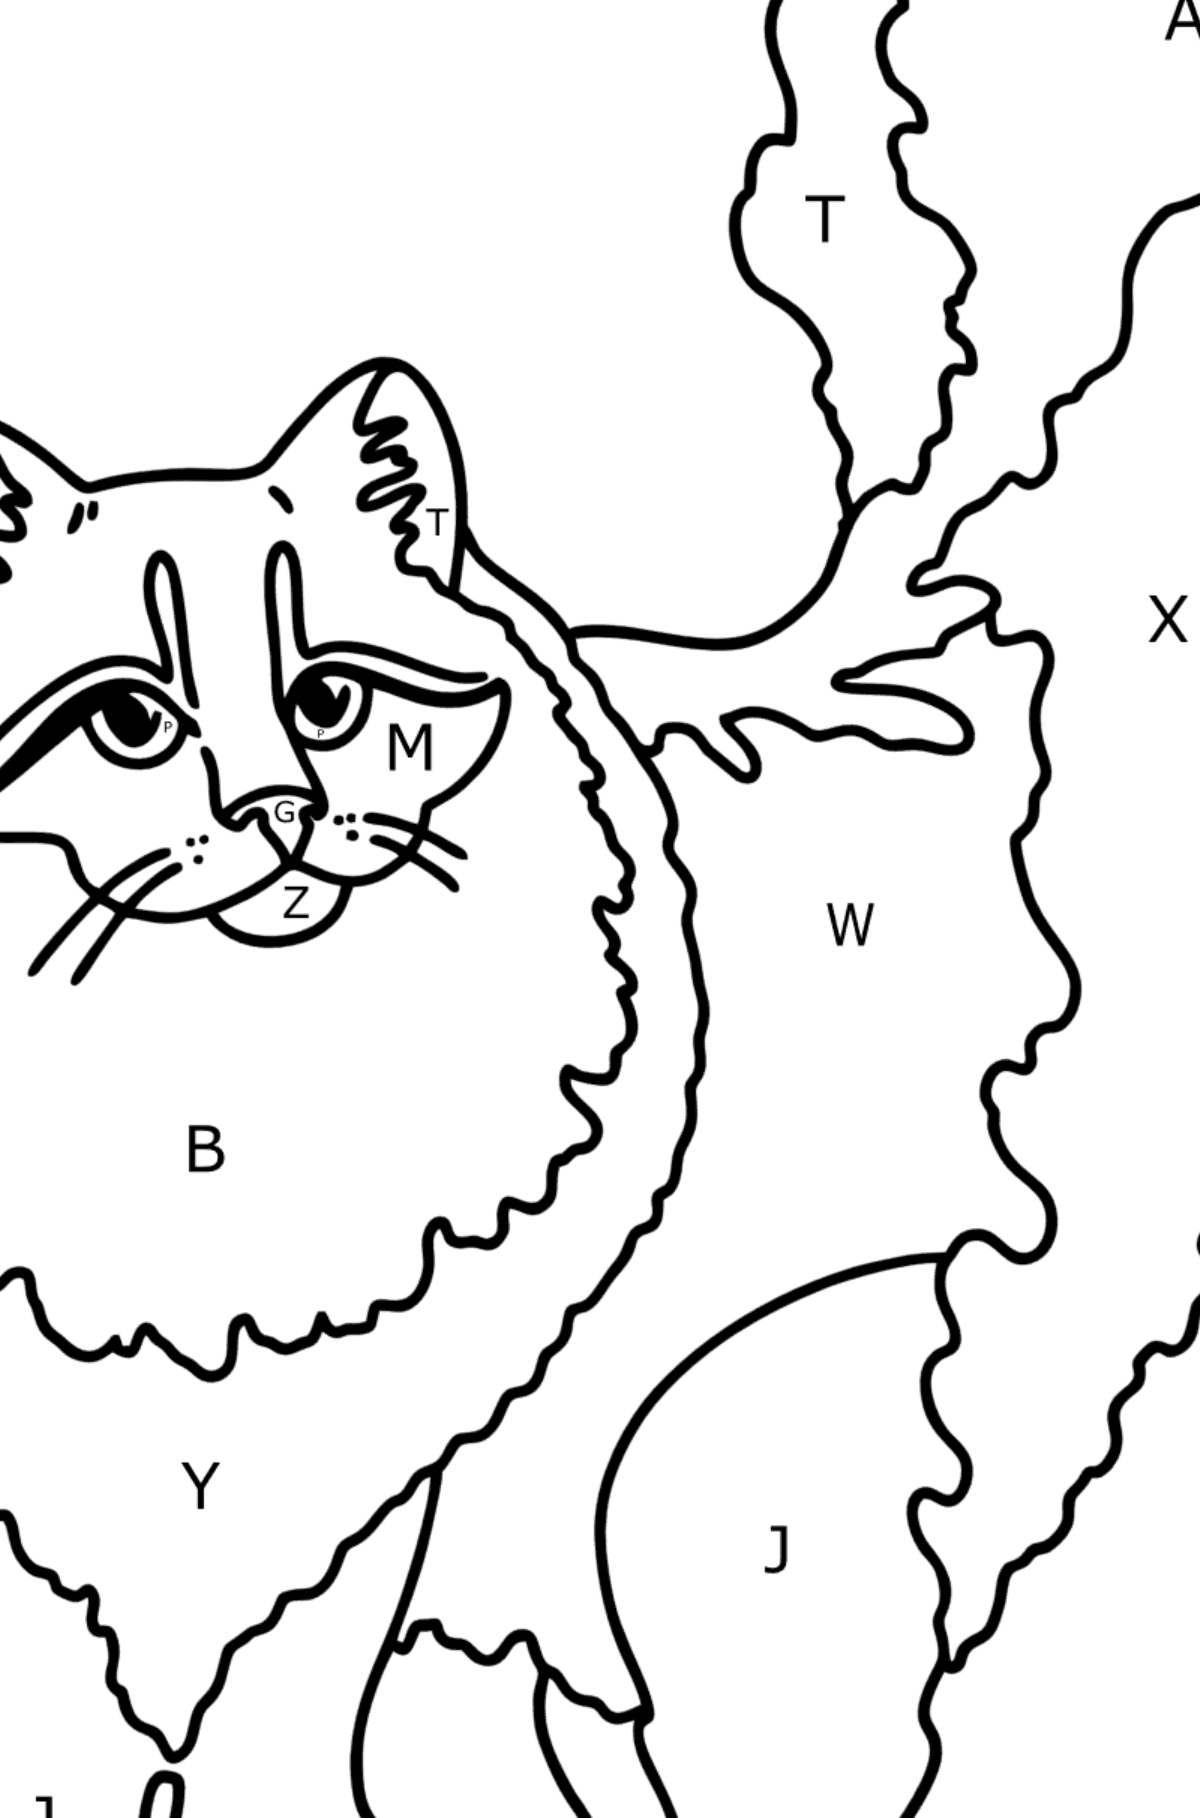 Siberian Cat coloring page - Coloring by Letters for Kids